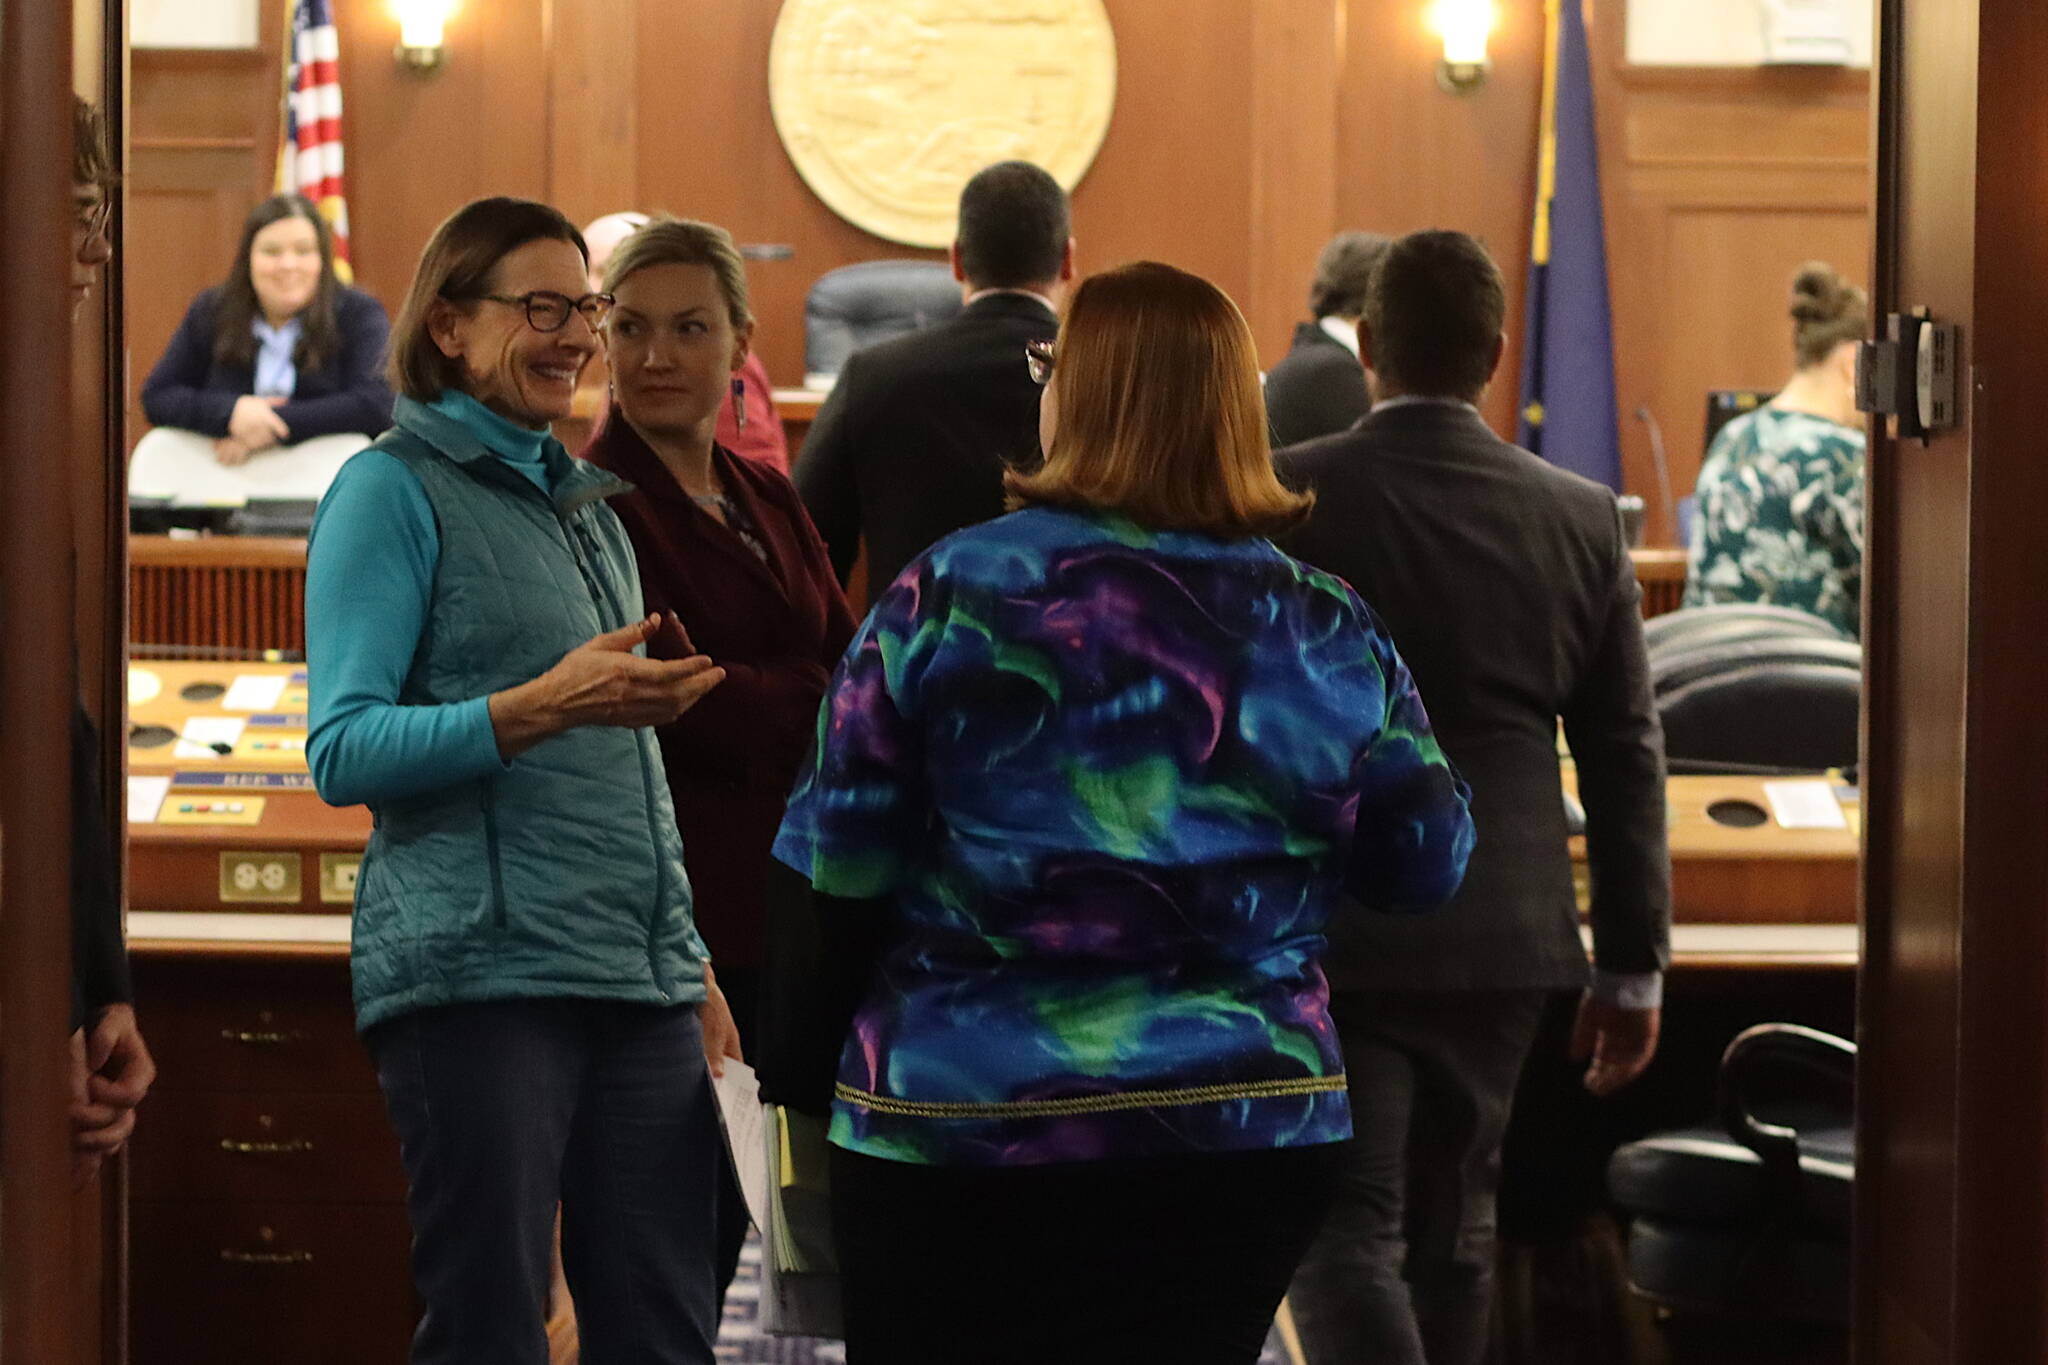 New members of the Alaska State Legislature gather in the House chambers for a mock floor session on Friday as part of their orientation for the start of the regular two-year session on Tuesday. (Mark Sabbatini / Juneau Empire)